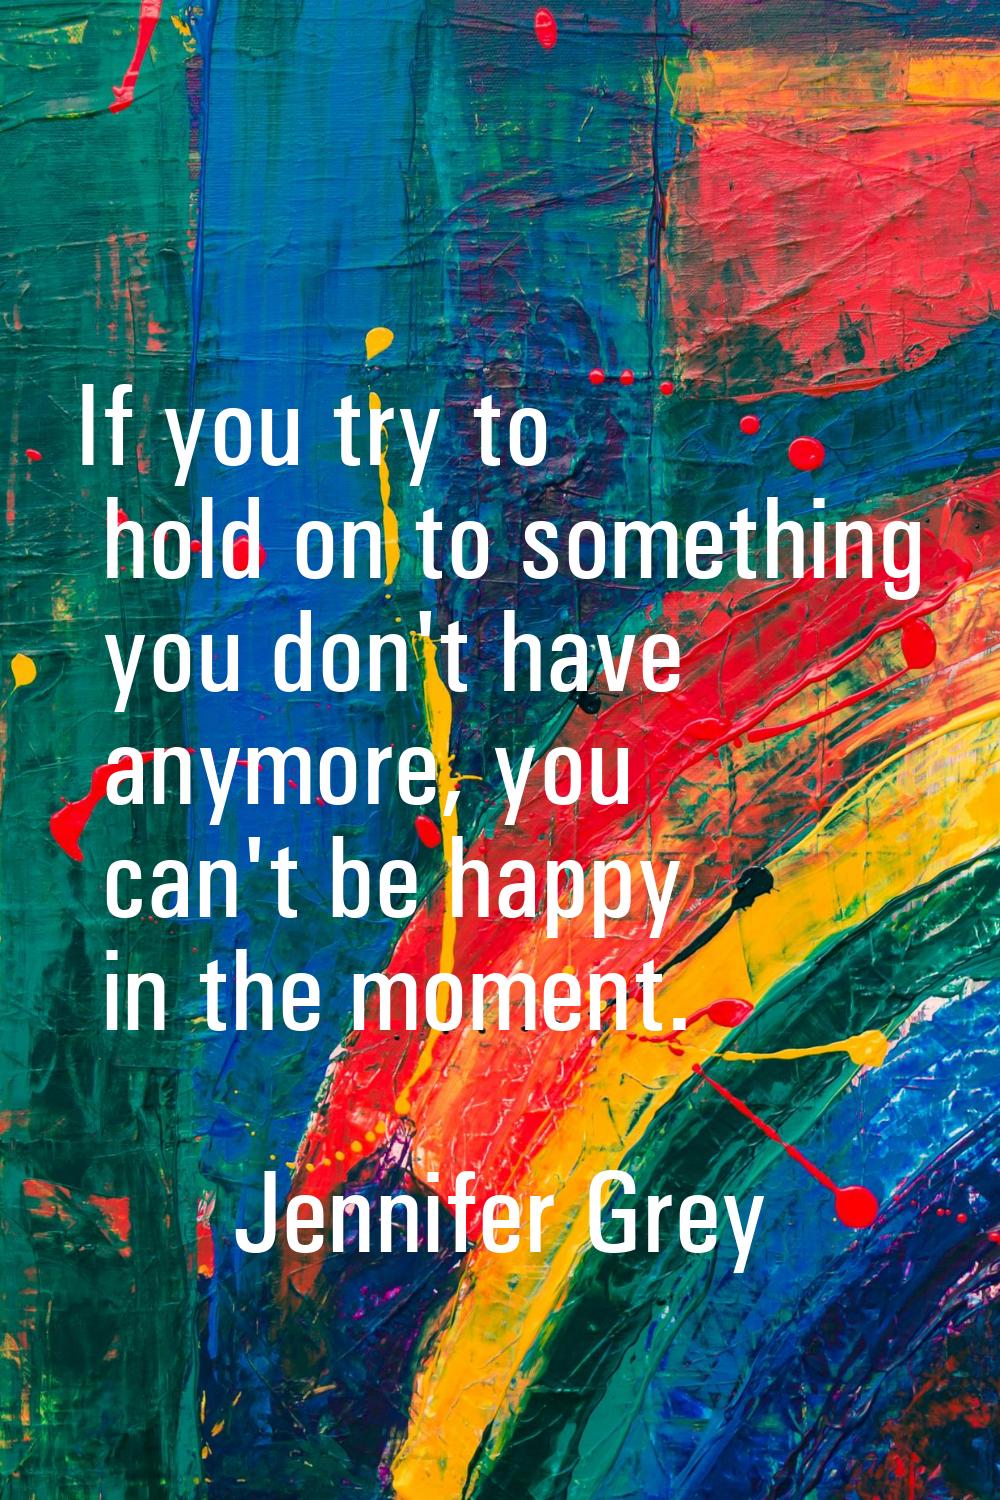 If you try to hold on to something you don't have anymore, you can't be happy in the moment.